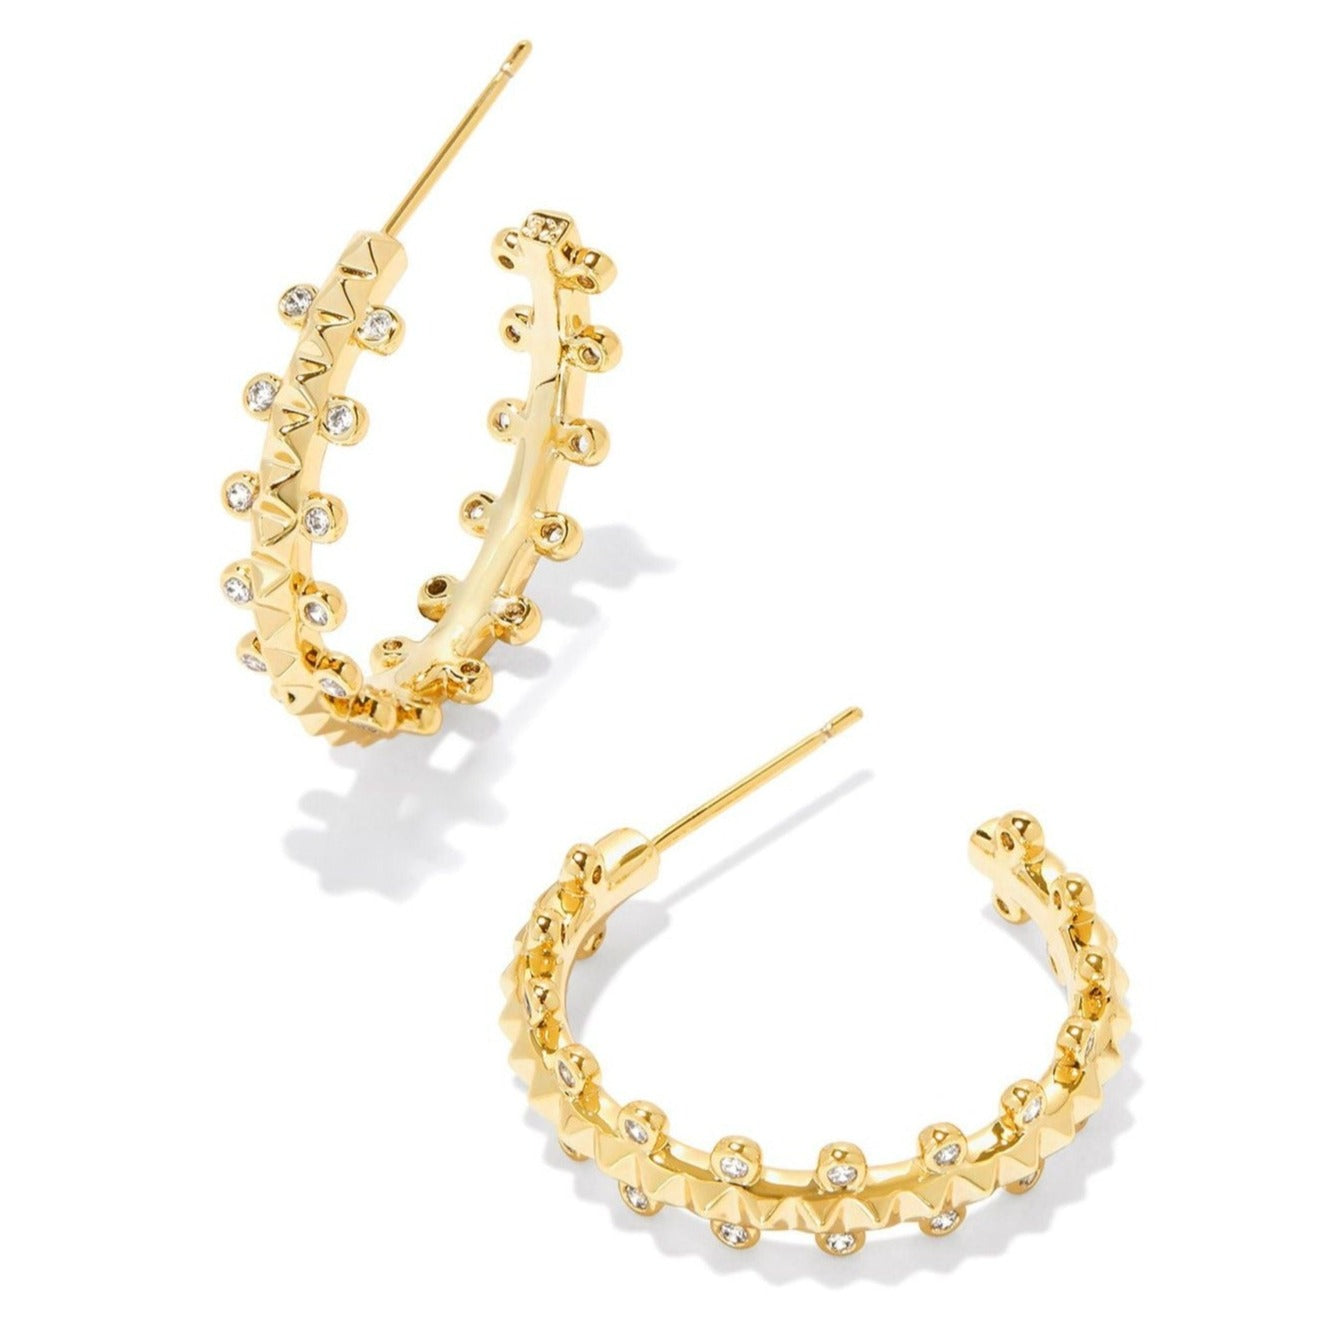 Kendra Scott | Jada Gold Small Hoop Earrings in White Crystal - Giddy Up Glamour Boutique